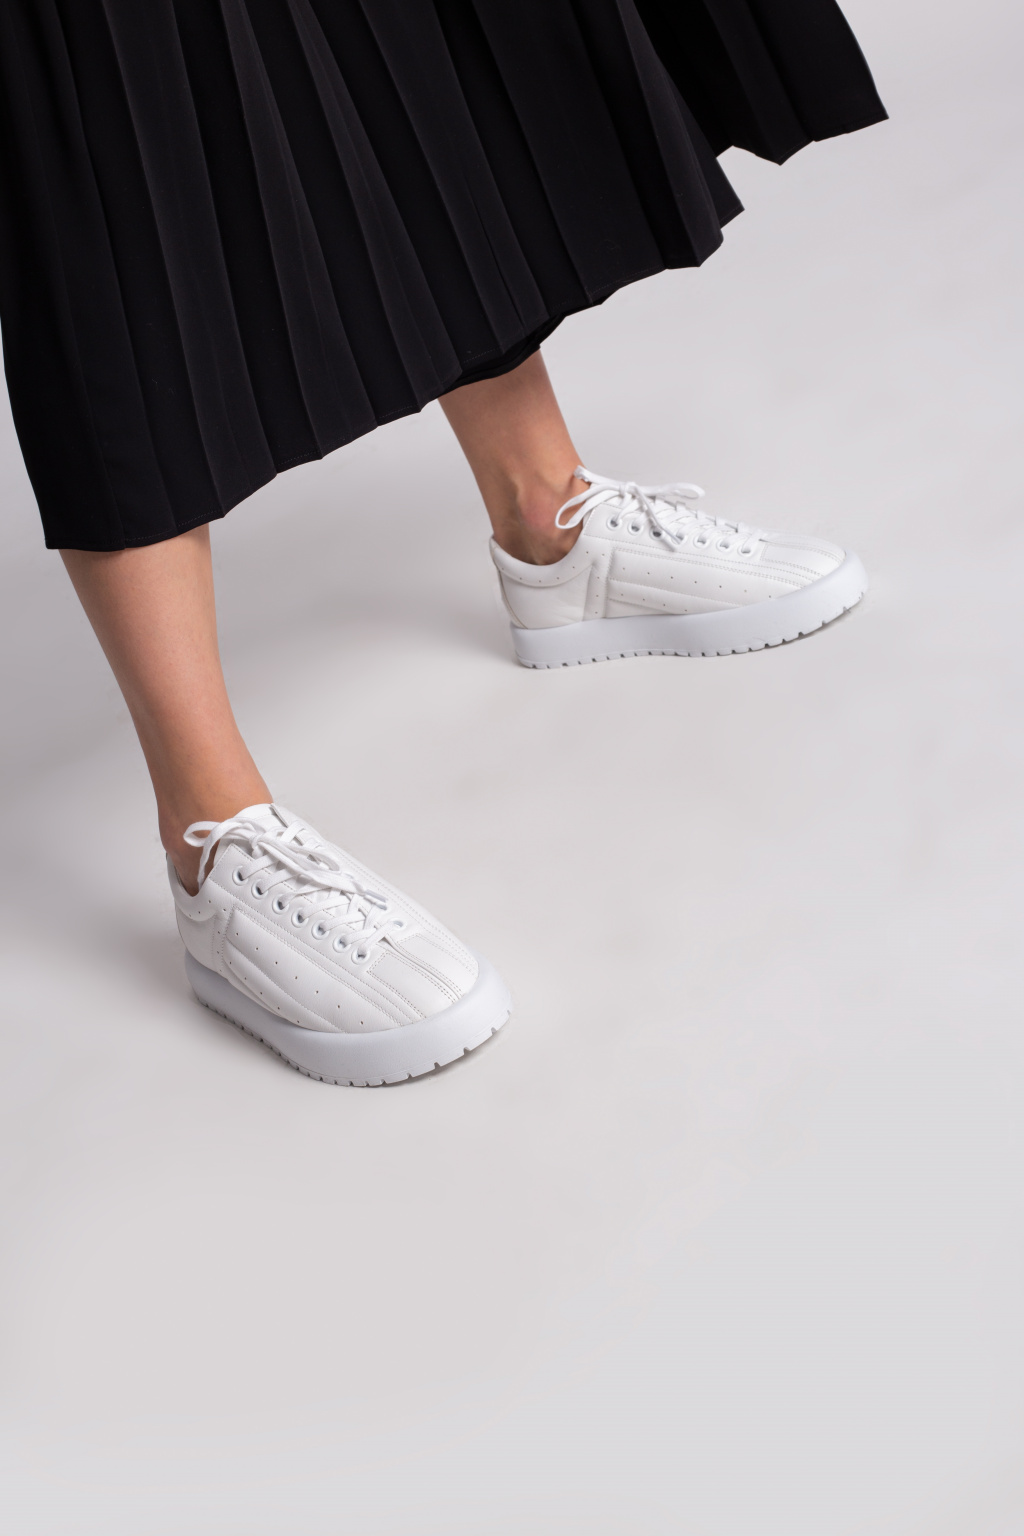 MM6 Maison Margiela Perforated sneakers